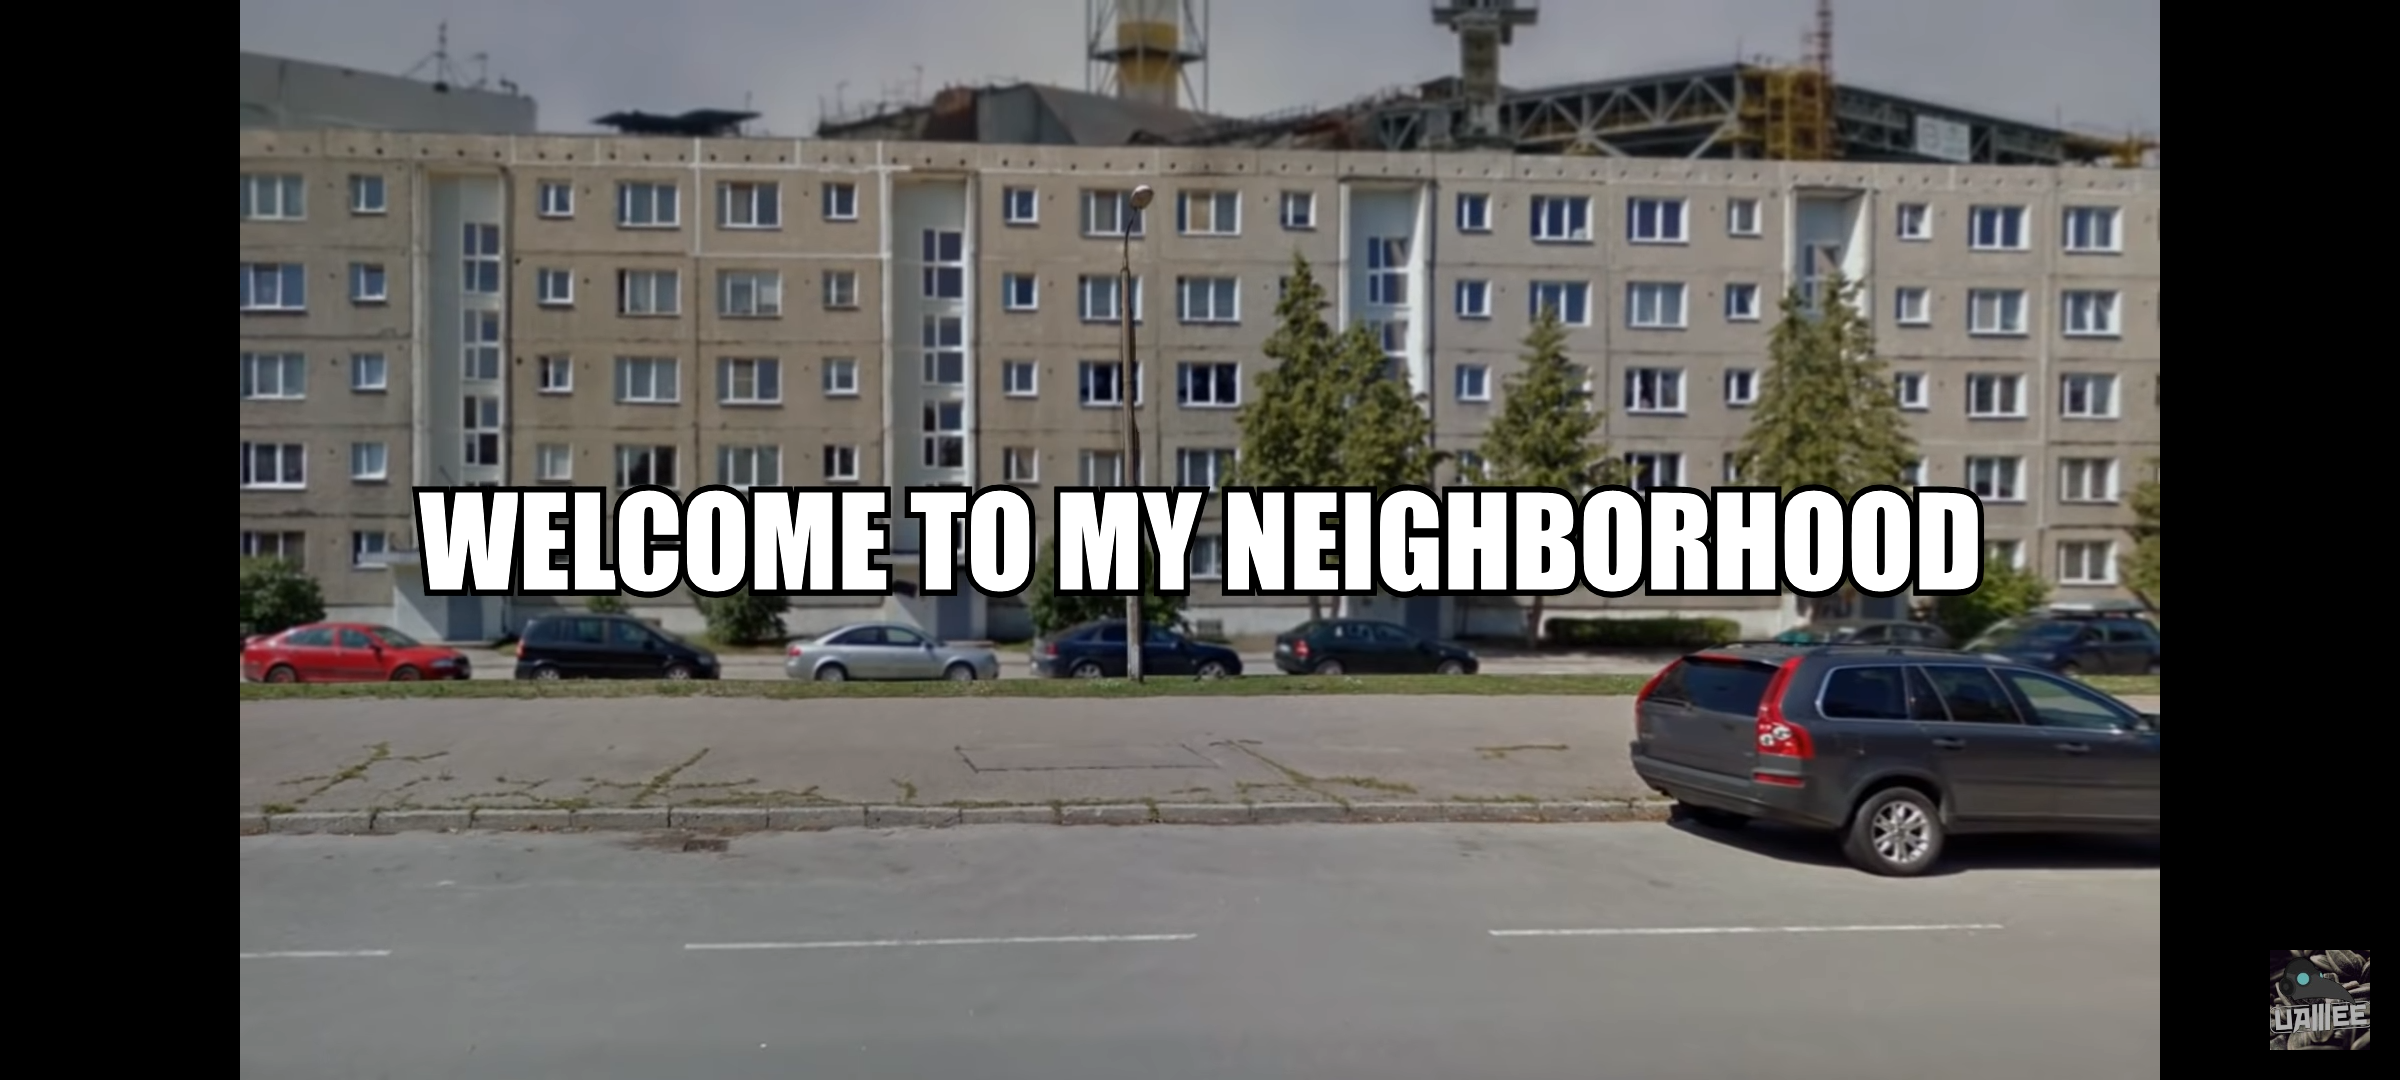 High Quality Welcome to my neighborhood, and now get out Blank Meme Template